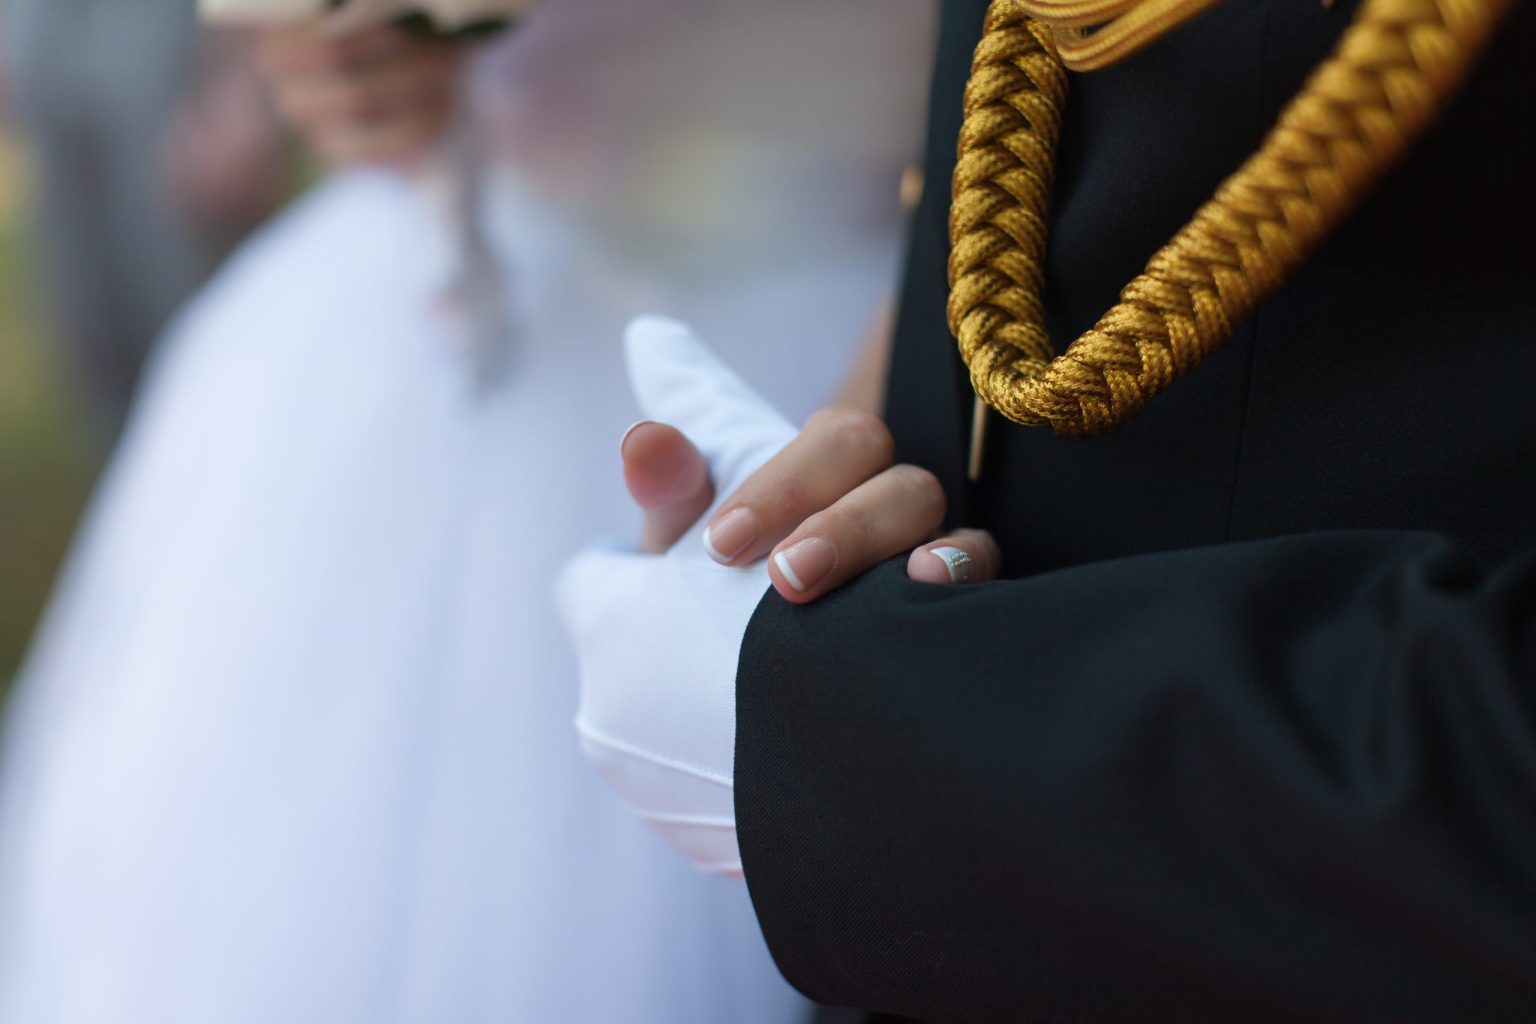 A groom in formal military attire holding hands with his bride.